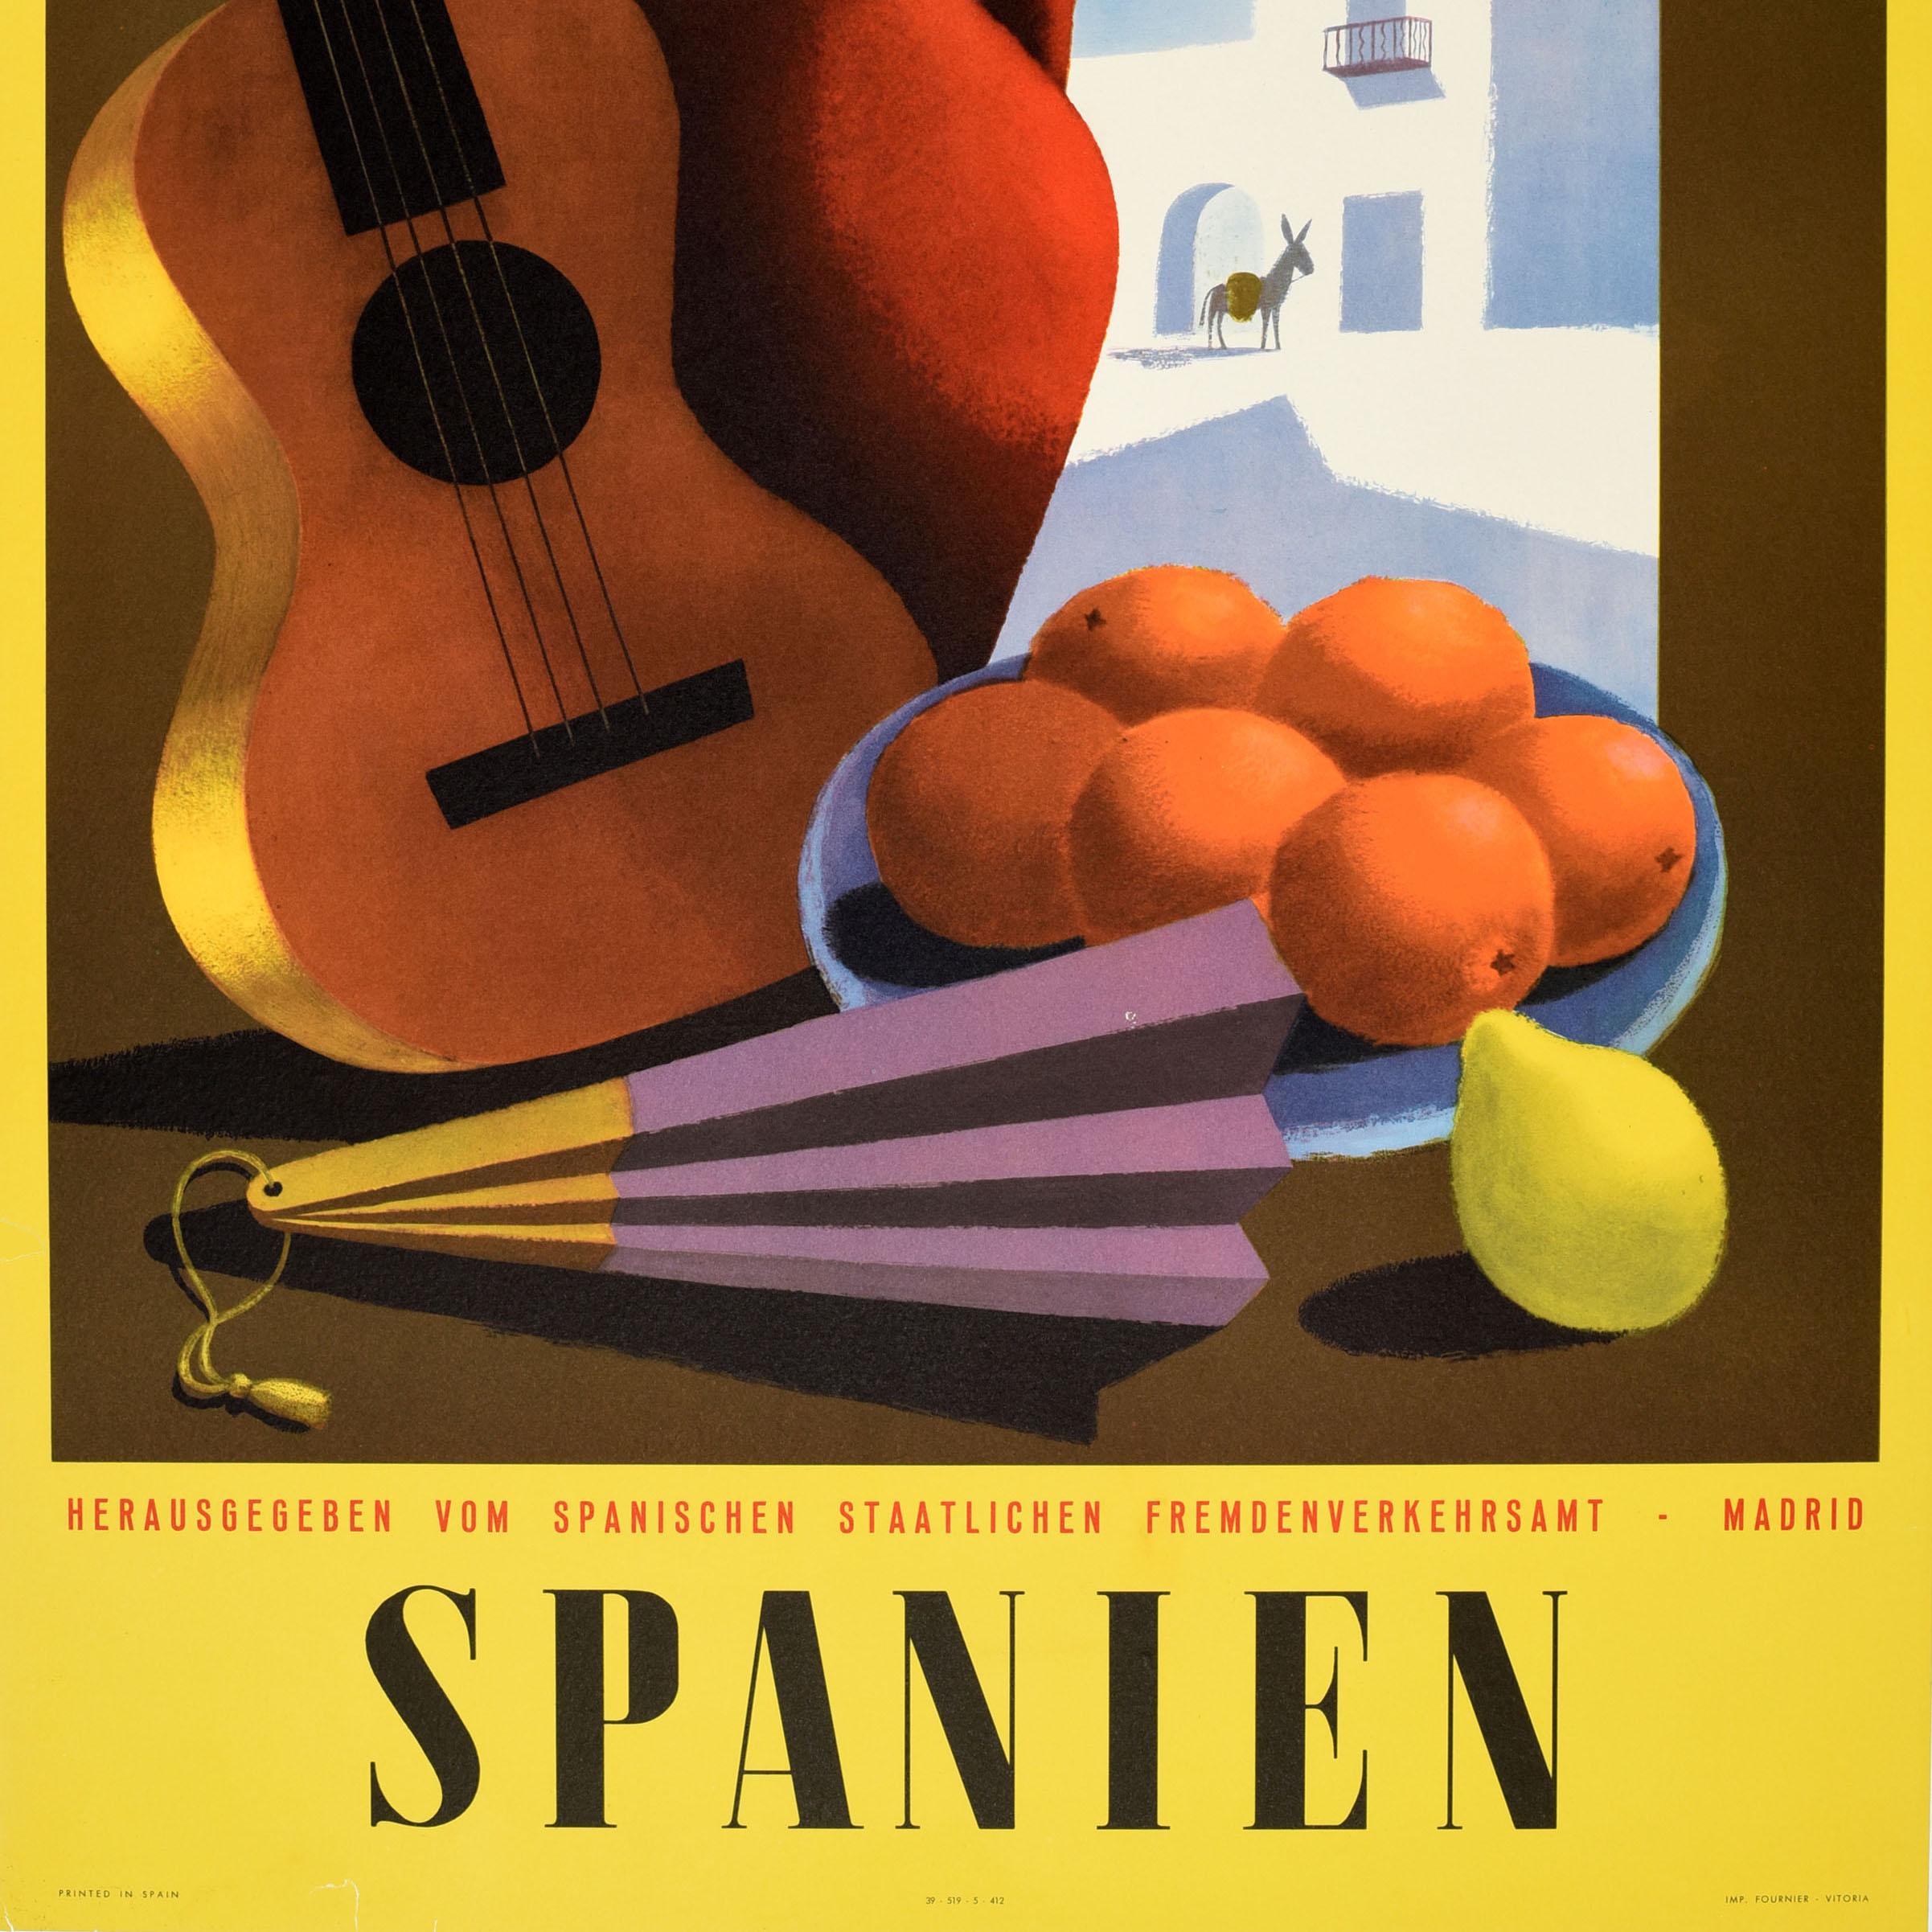 Original vintage travel poster for Spain / Spanien issued by the Spanish State Tourist Office featuring a colourful still life design by Guy Georget (1911-1992) depicting a fan and pot, oranges on a plate, a lemon and a guitar against the wall with